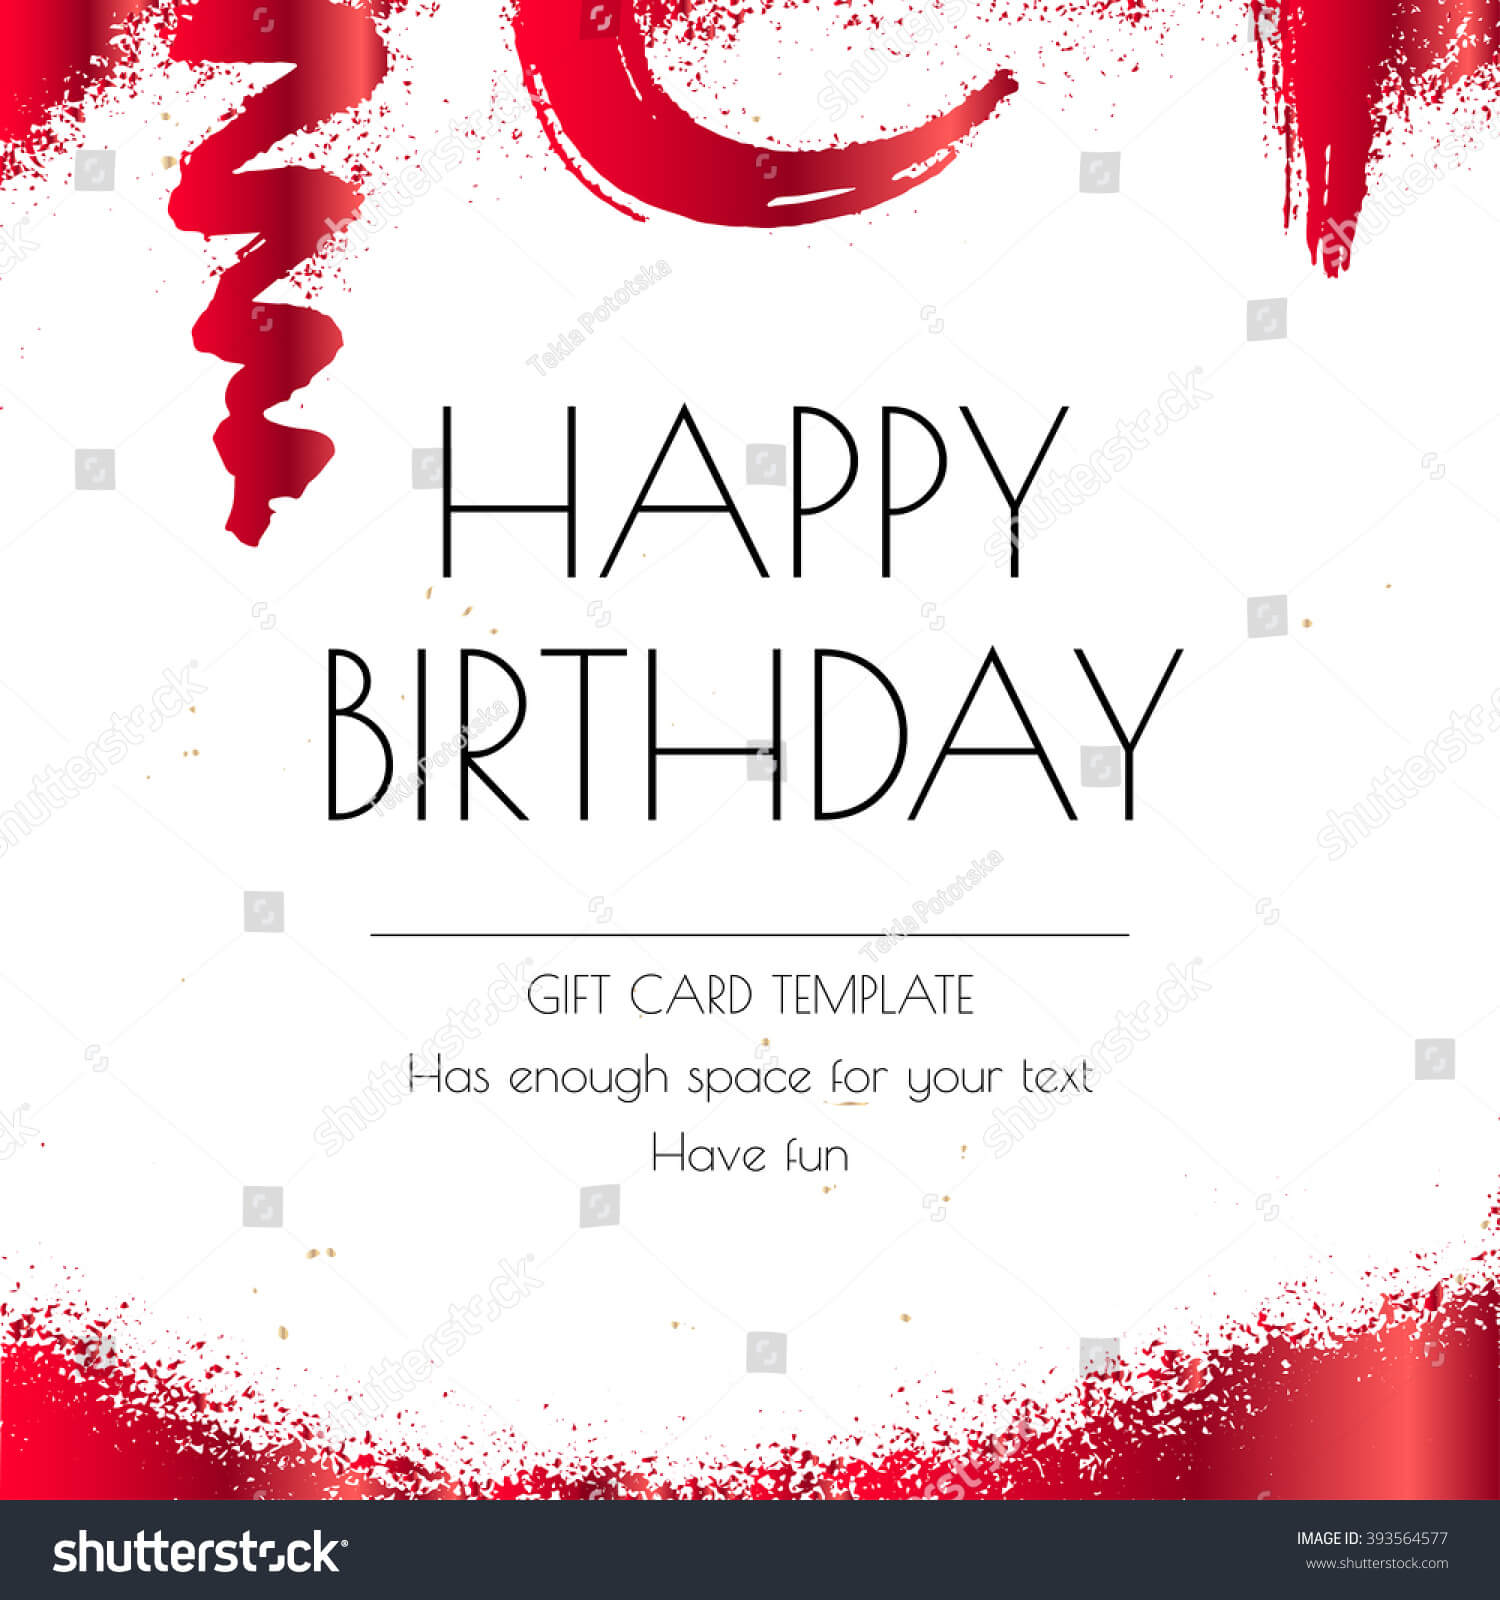 Thank You Card Indesign Template ] – Weekly Calendar Regarding Birthday Card Indesign Template